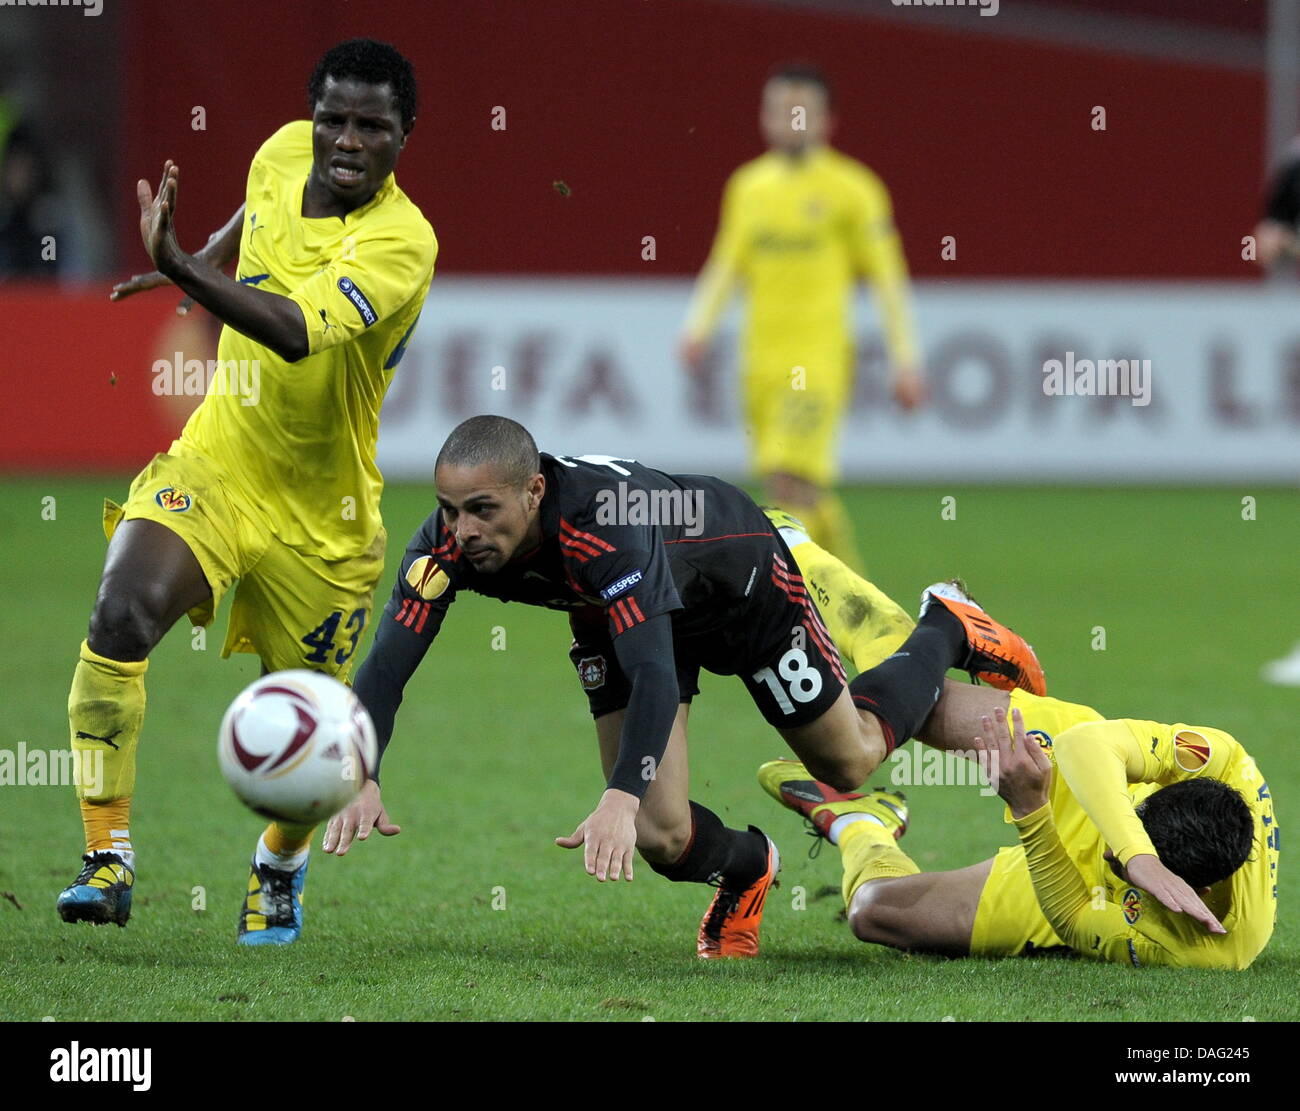 The picture shows Leverkusen's Sydney Sam (M) vieing with Jose Catala (R) and Wakaso Mubarak (L) of Villarreal during the Europa League round of 16 first leg soccer match between Bayer Leverkusen and Villarreal C.F. at the BayArena in Leverkusen, Germany, on 10 March 2011. Photo: Federico Gambarini Stock Photo